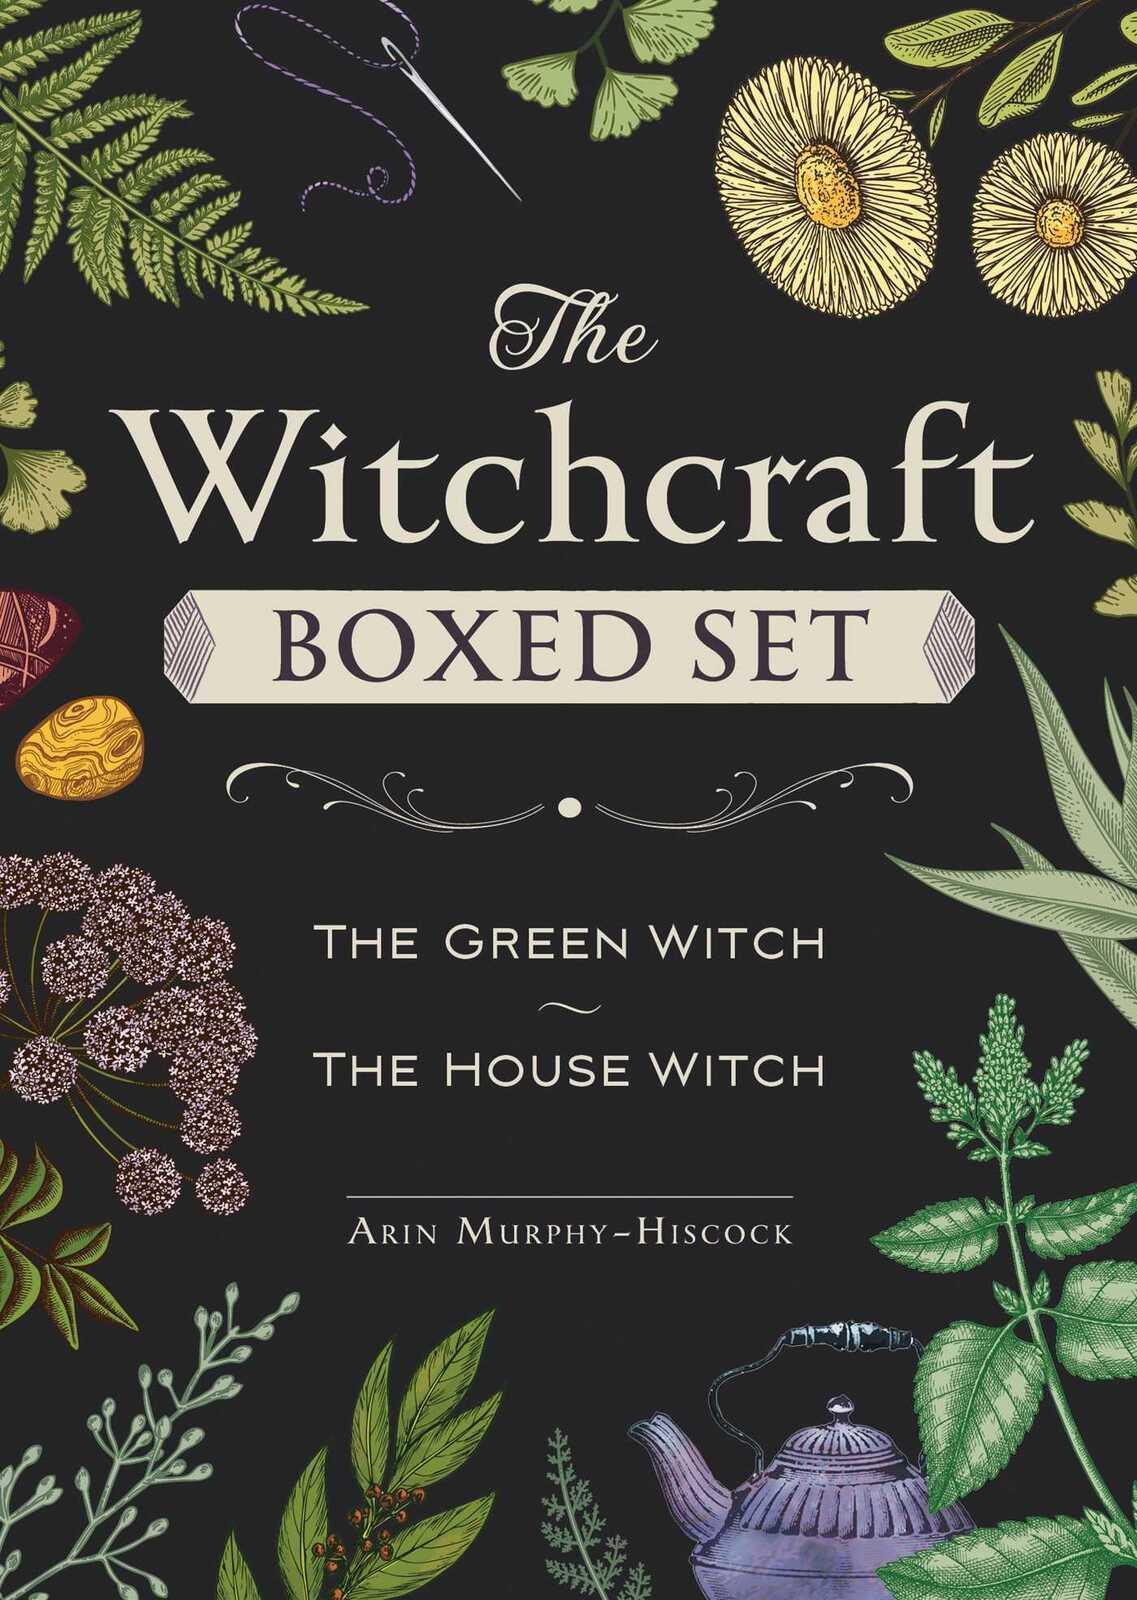 Witchcraft Boxed Set, The: Featuring The Green Witch and The House Witch - Inspire Me Naturally 